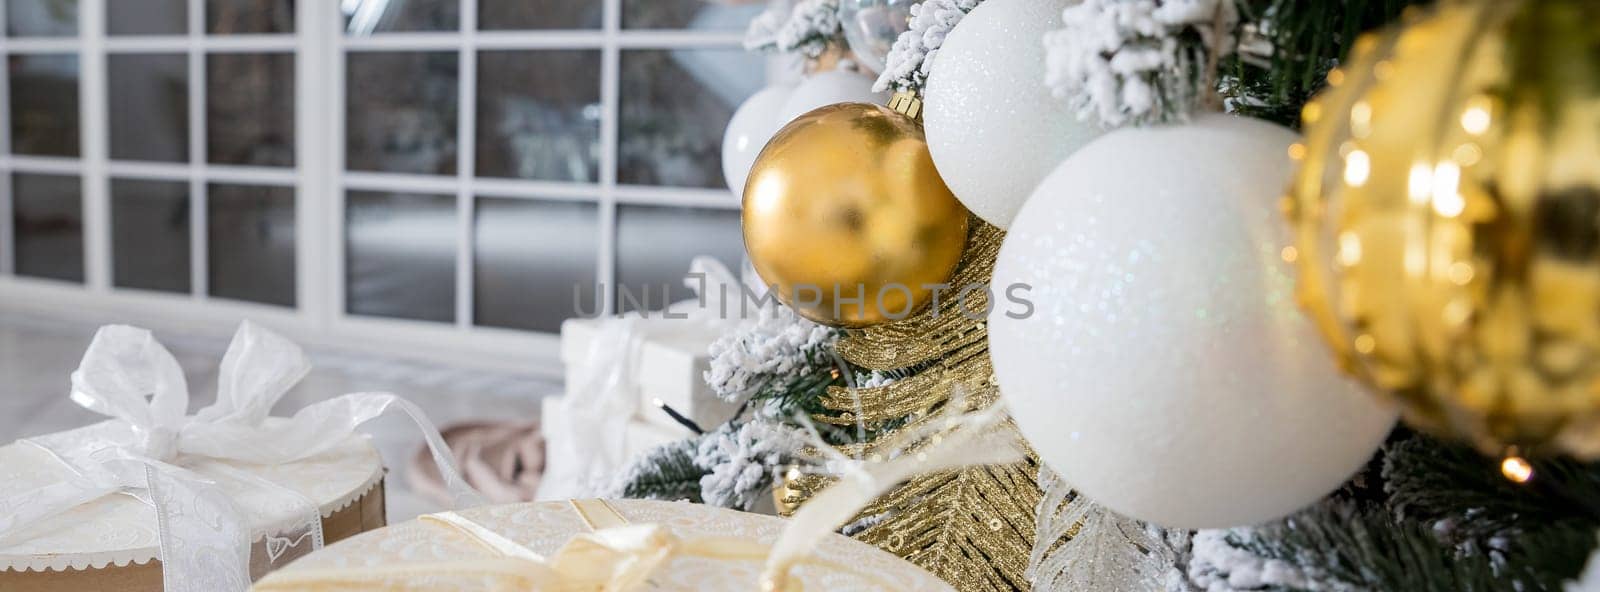 Christmas background. fir tree branch with cones and ornament. Christmas baubles in golden and white colours. Winter holidays concept. glitter Christmas baubles hanging from the branch by YuliaYaspe1979